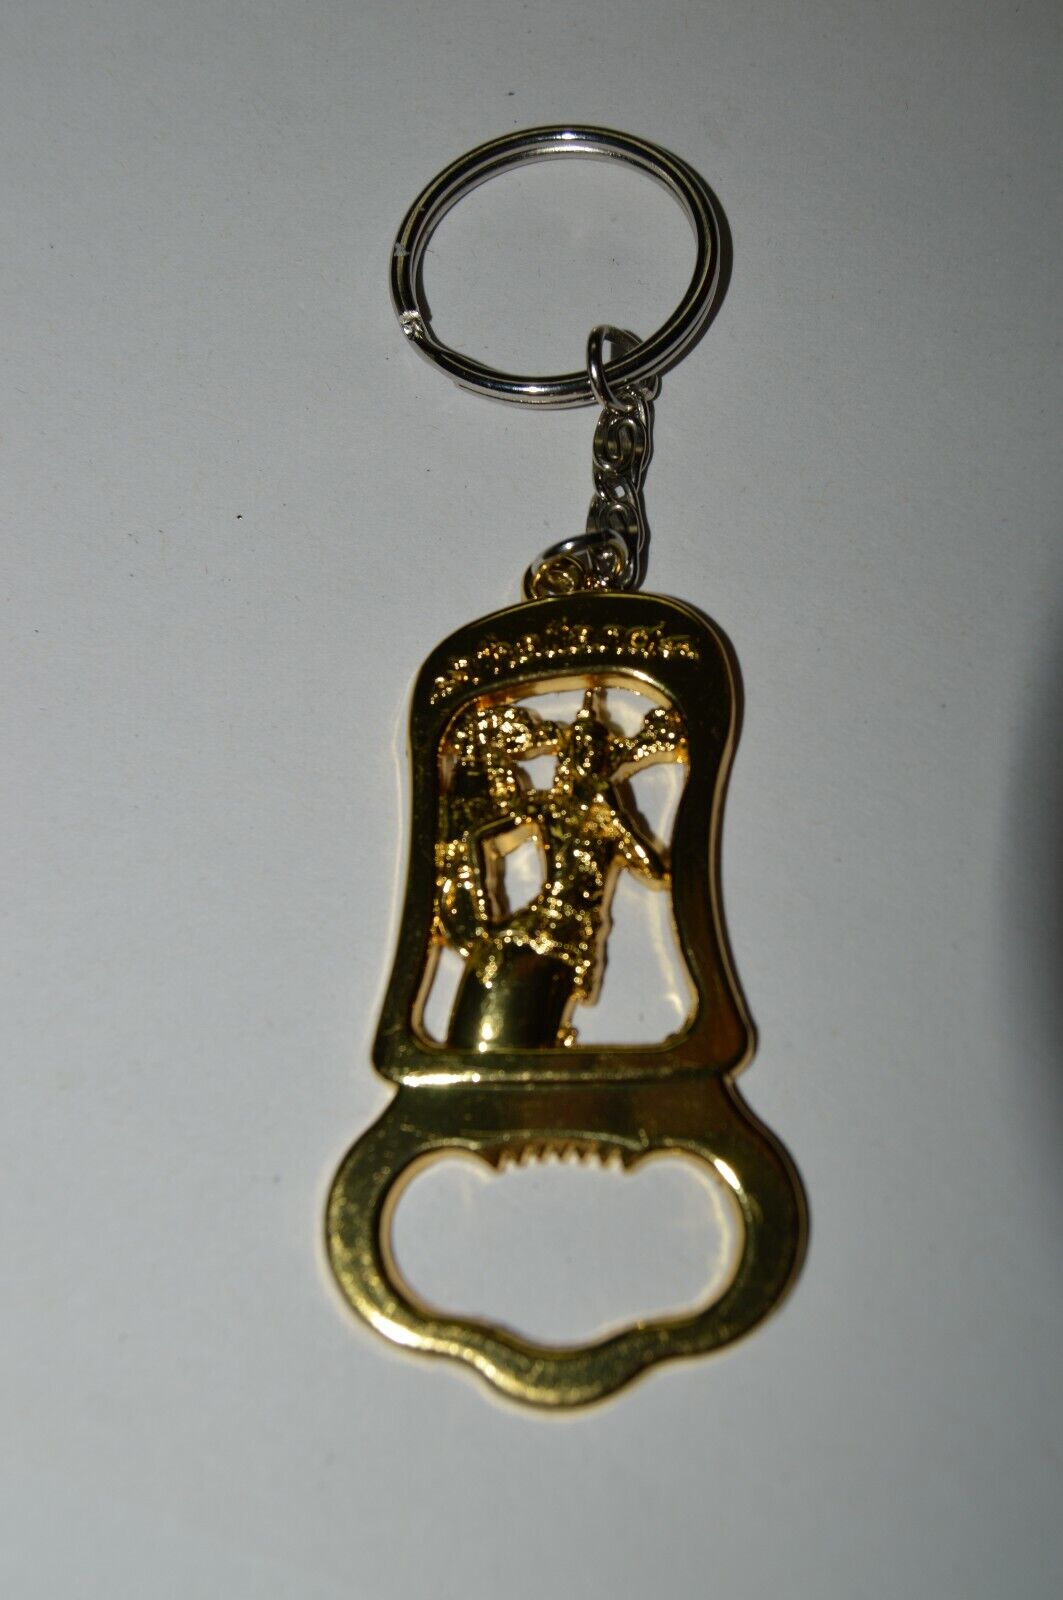 Golden Metal Malaysia See Through Bottle Opener Key Chain MINTY